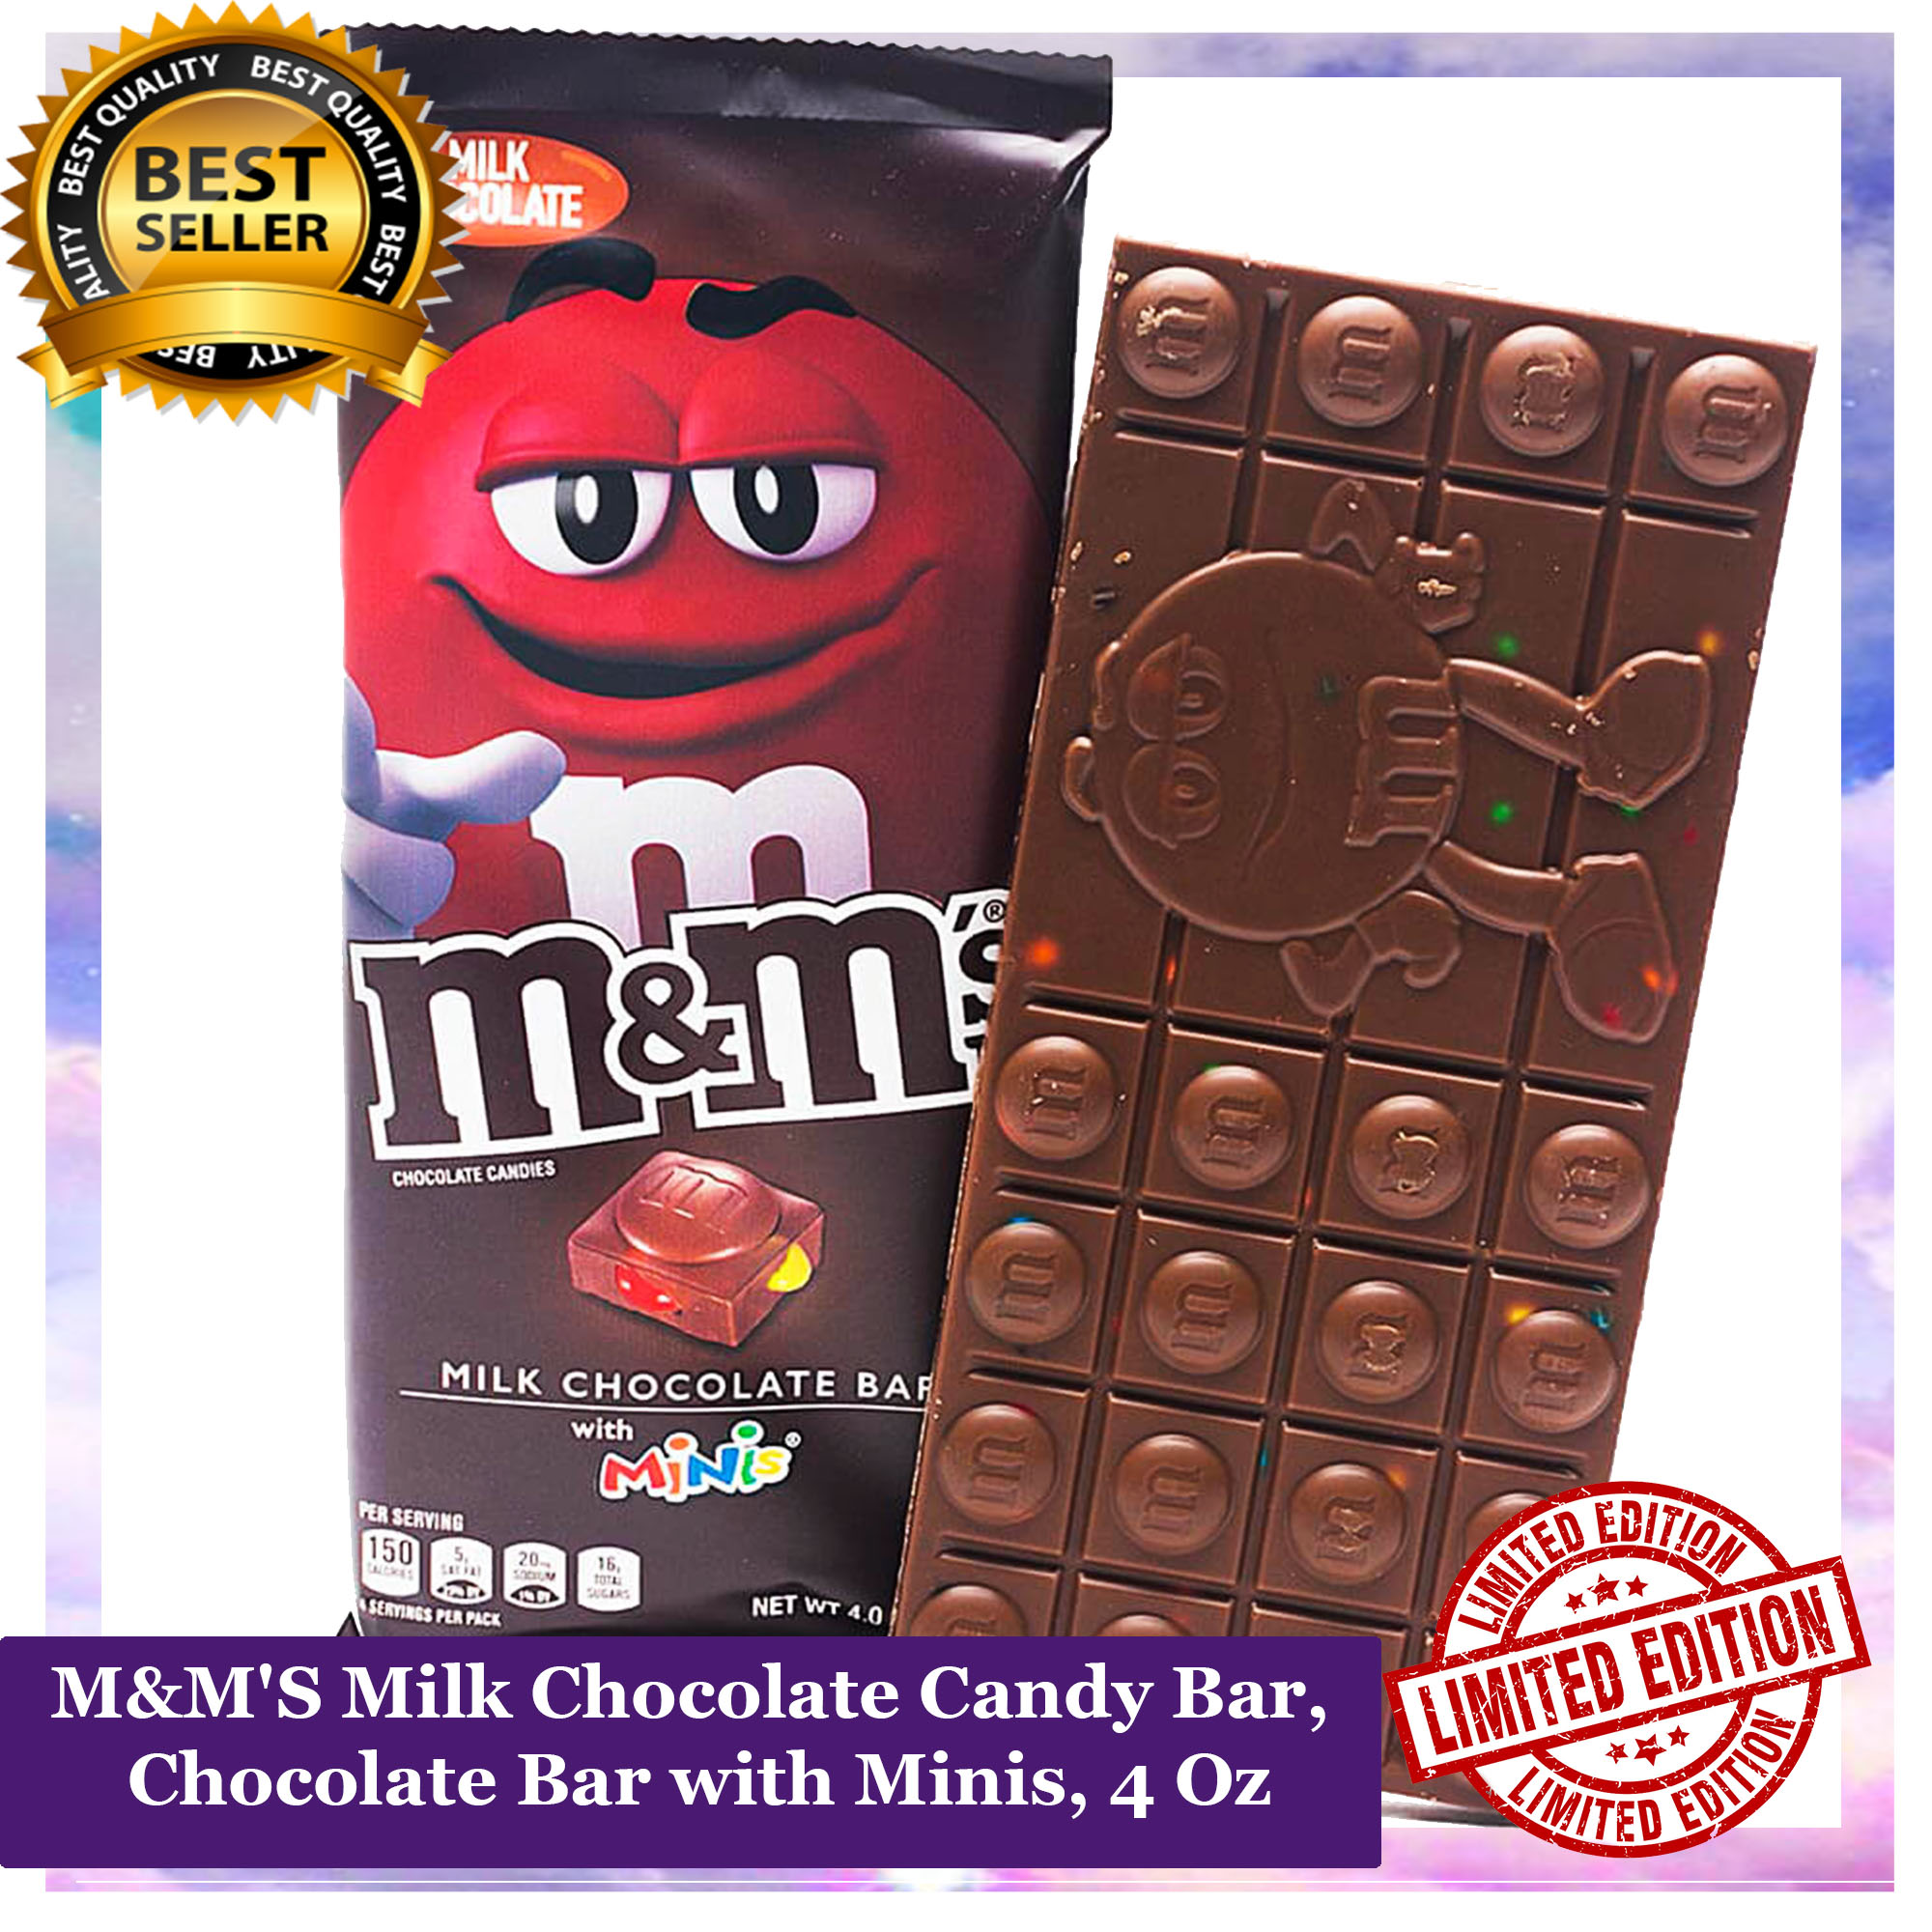 M&M's Limited Edition Milk Chocolate Candy featuring Purple Candy